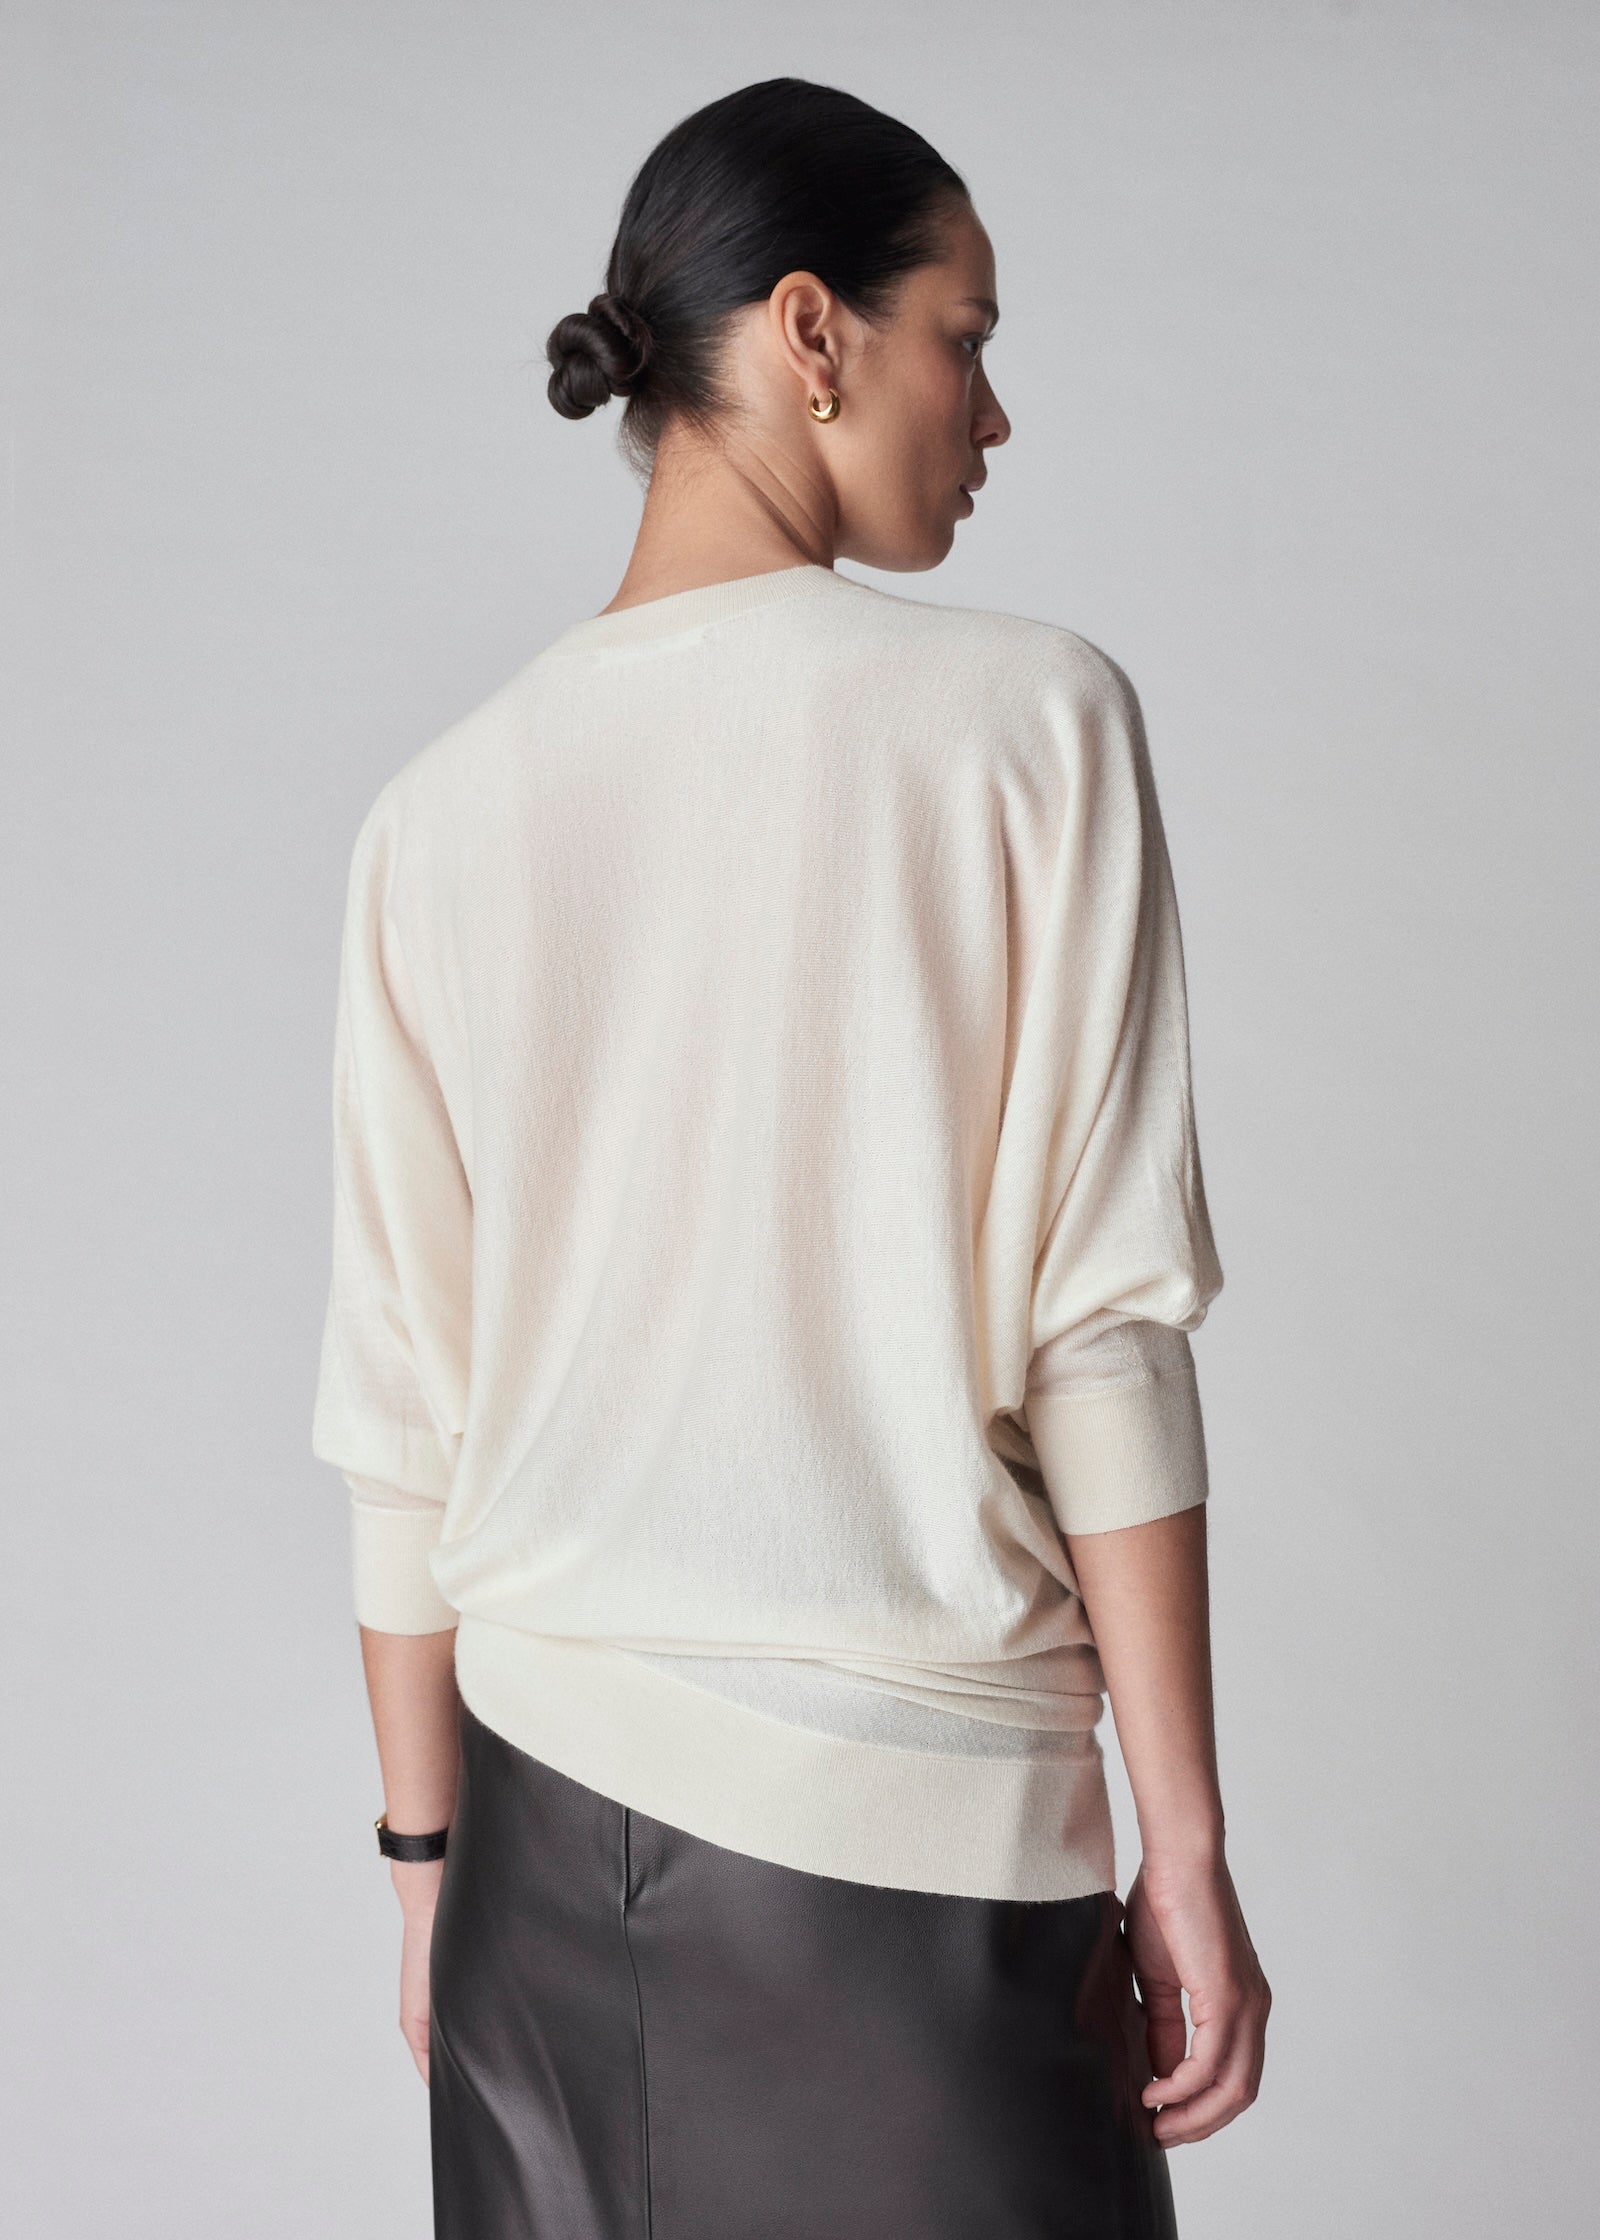 Draped Knit Top in Fine Cashmere - Ivory - CO Collections